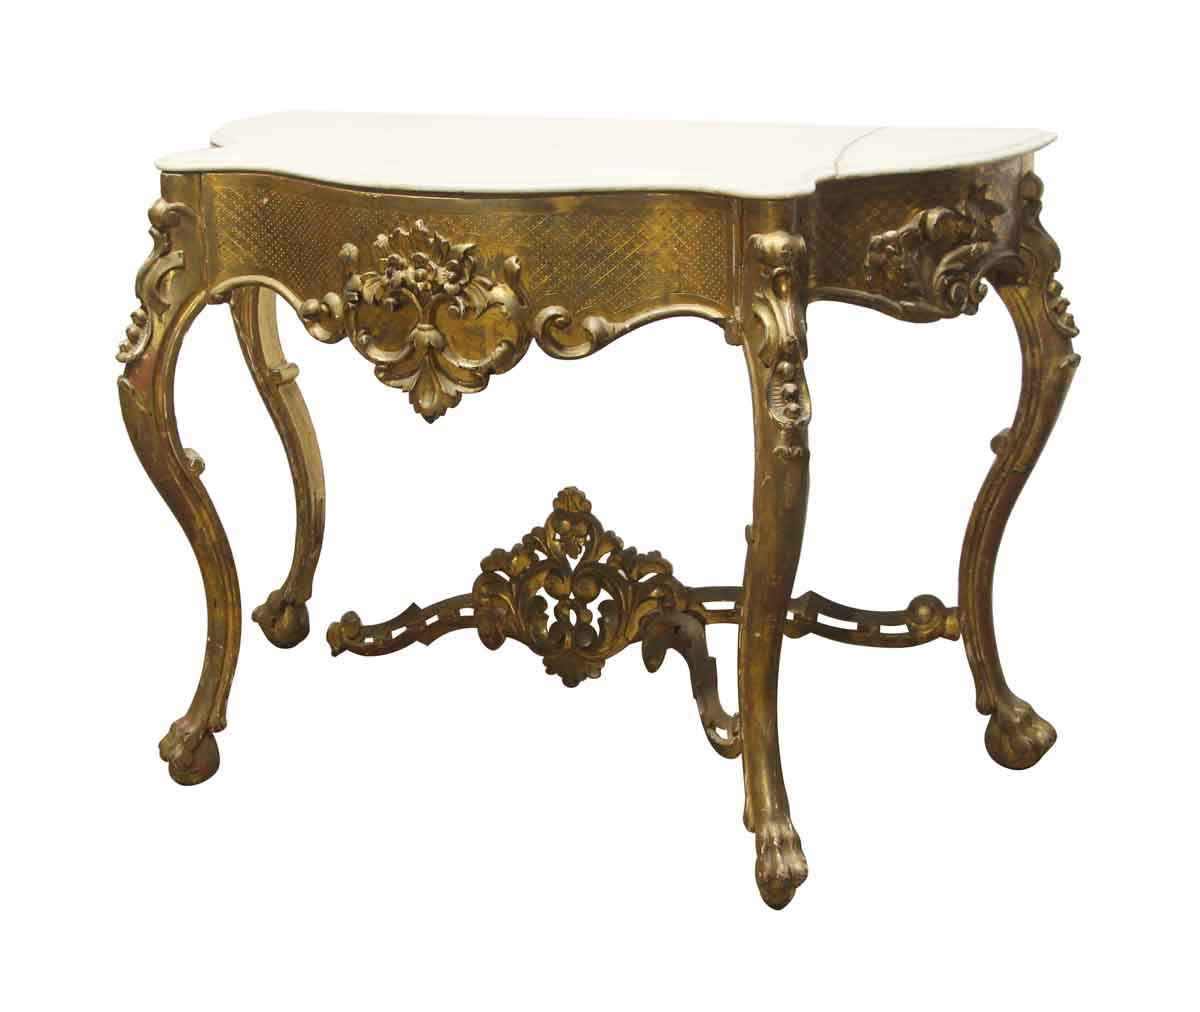 Antique Rococo Marble Top Gilt Wood Console Table | Olde Good Things